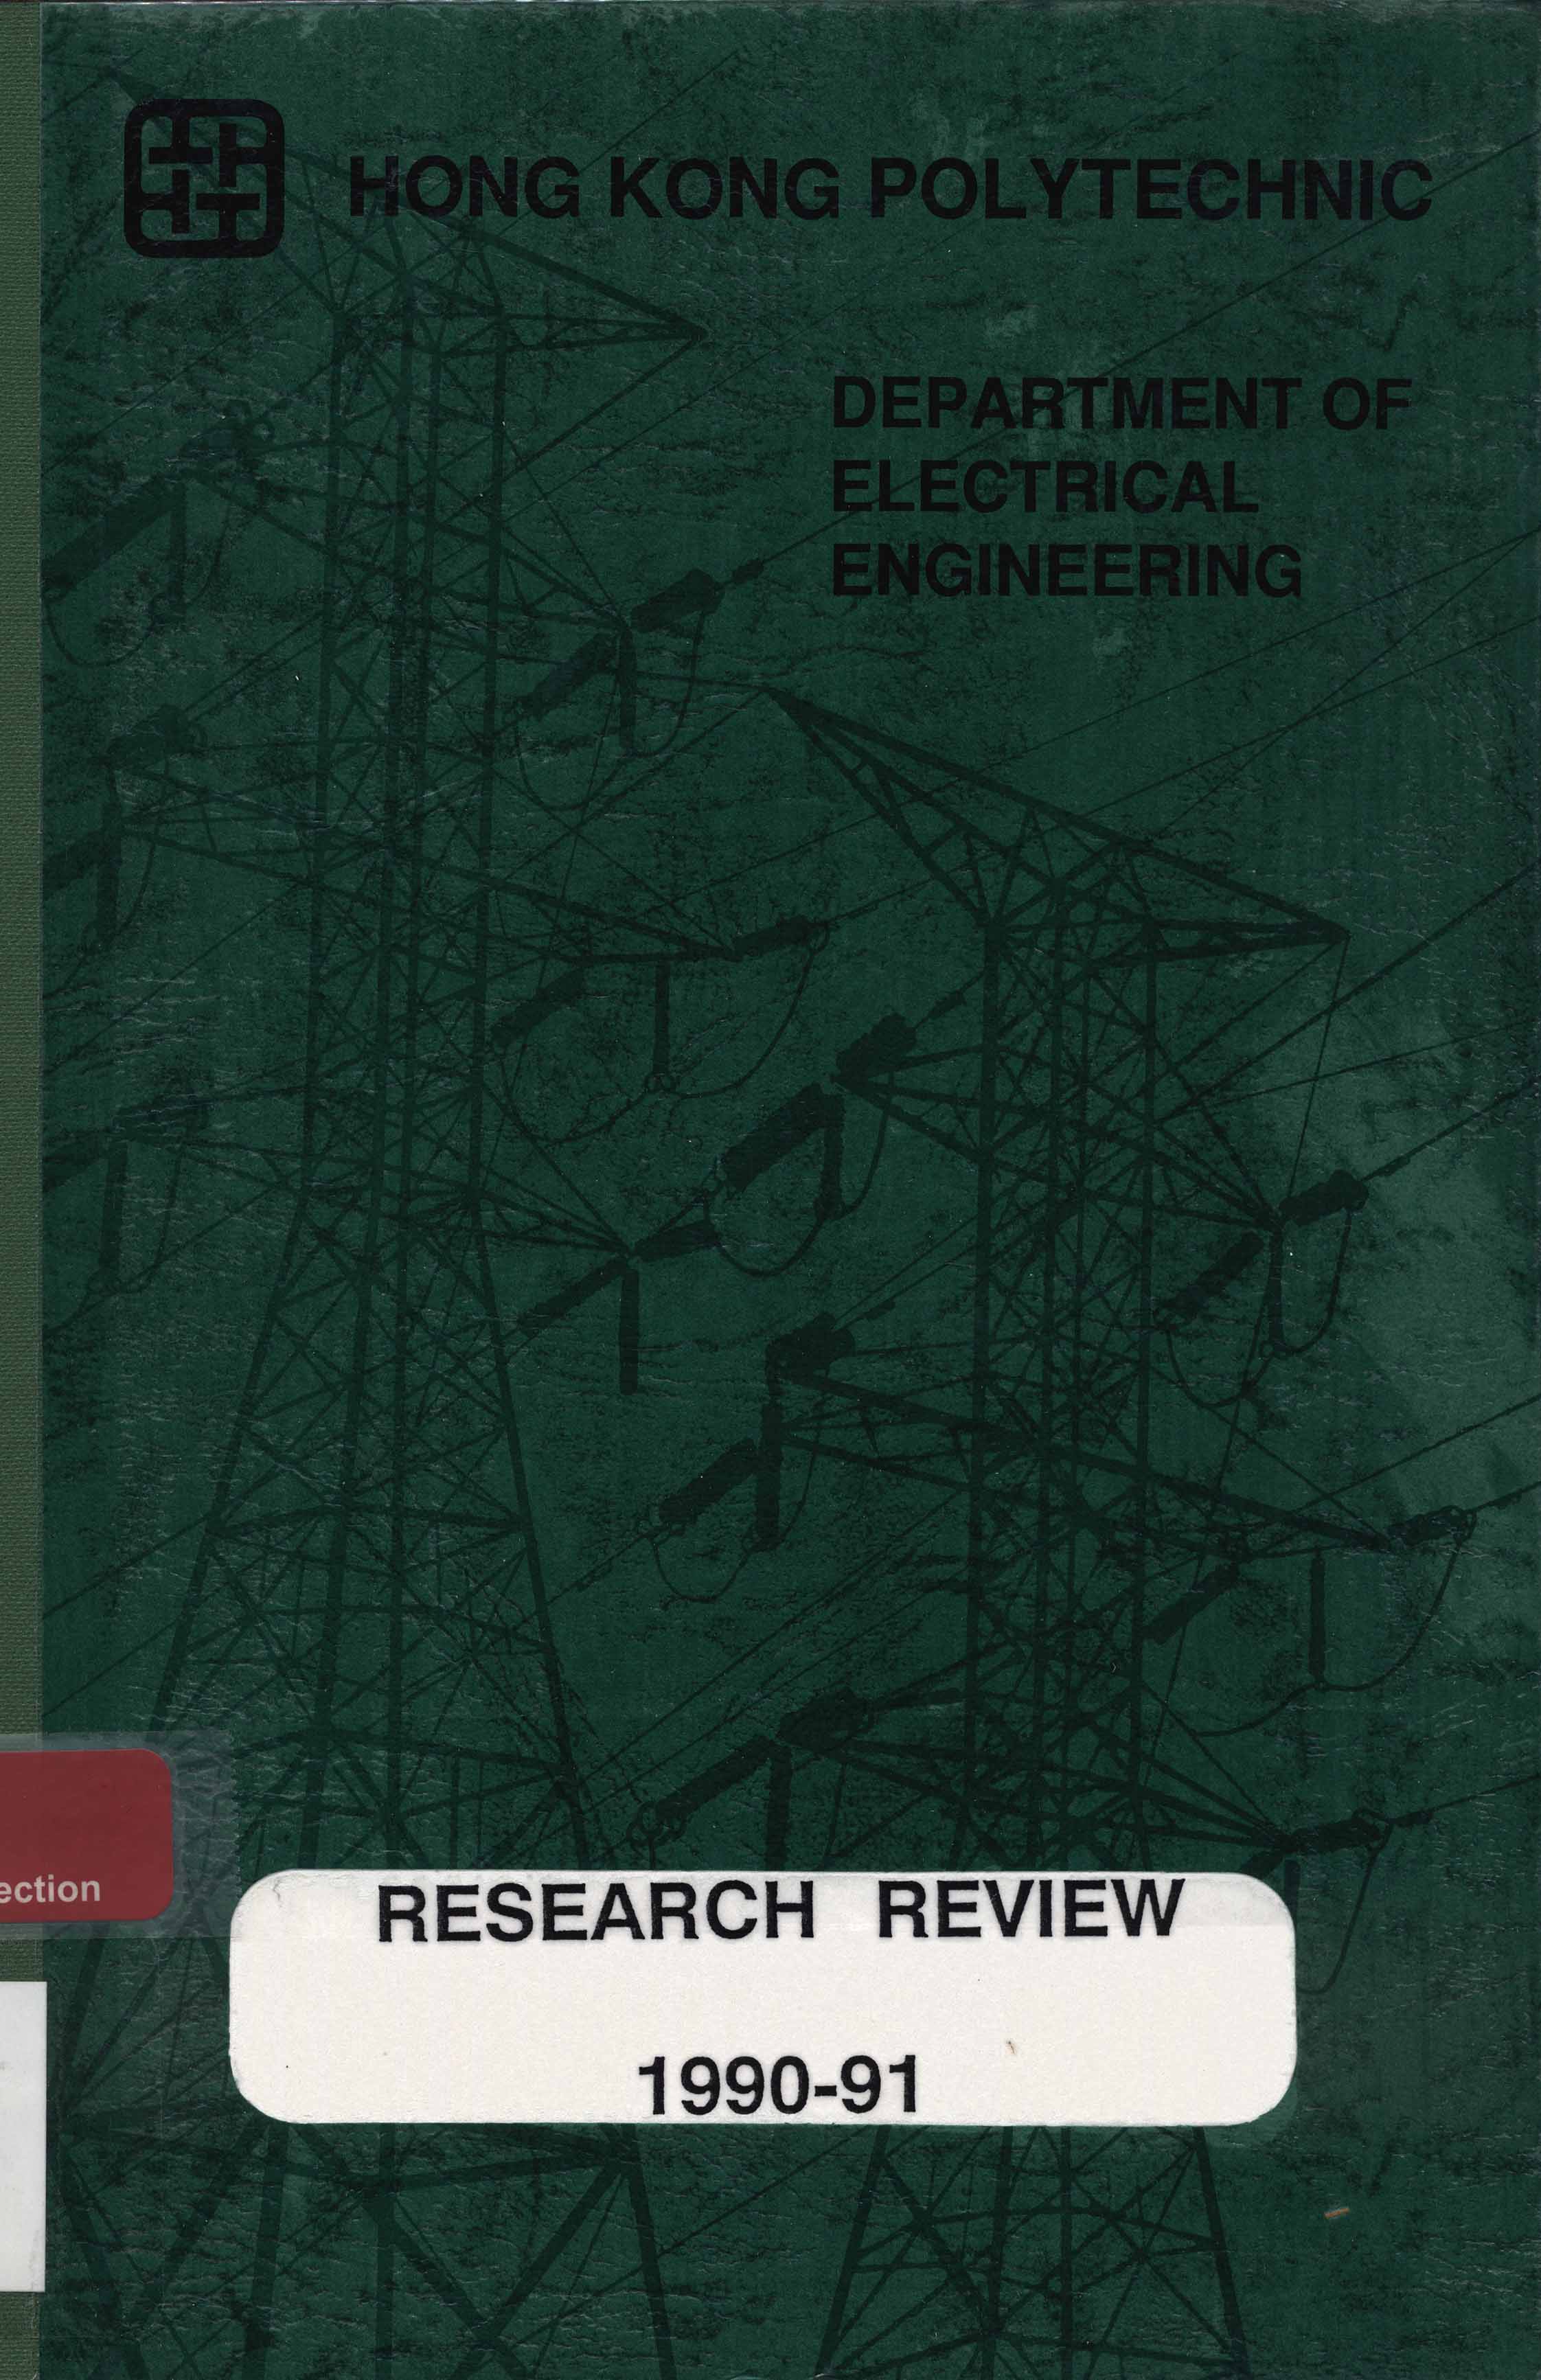 Hong Kong Polytechnic. Department of Electrical Engineering. Research review 1990-91